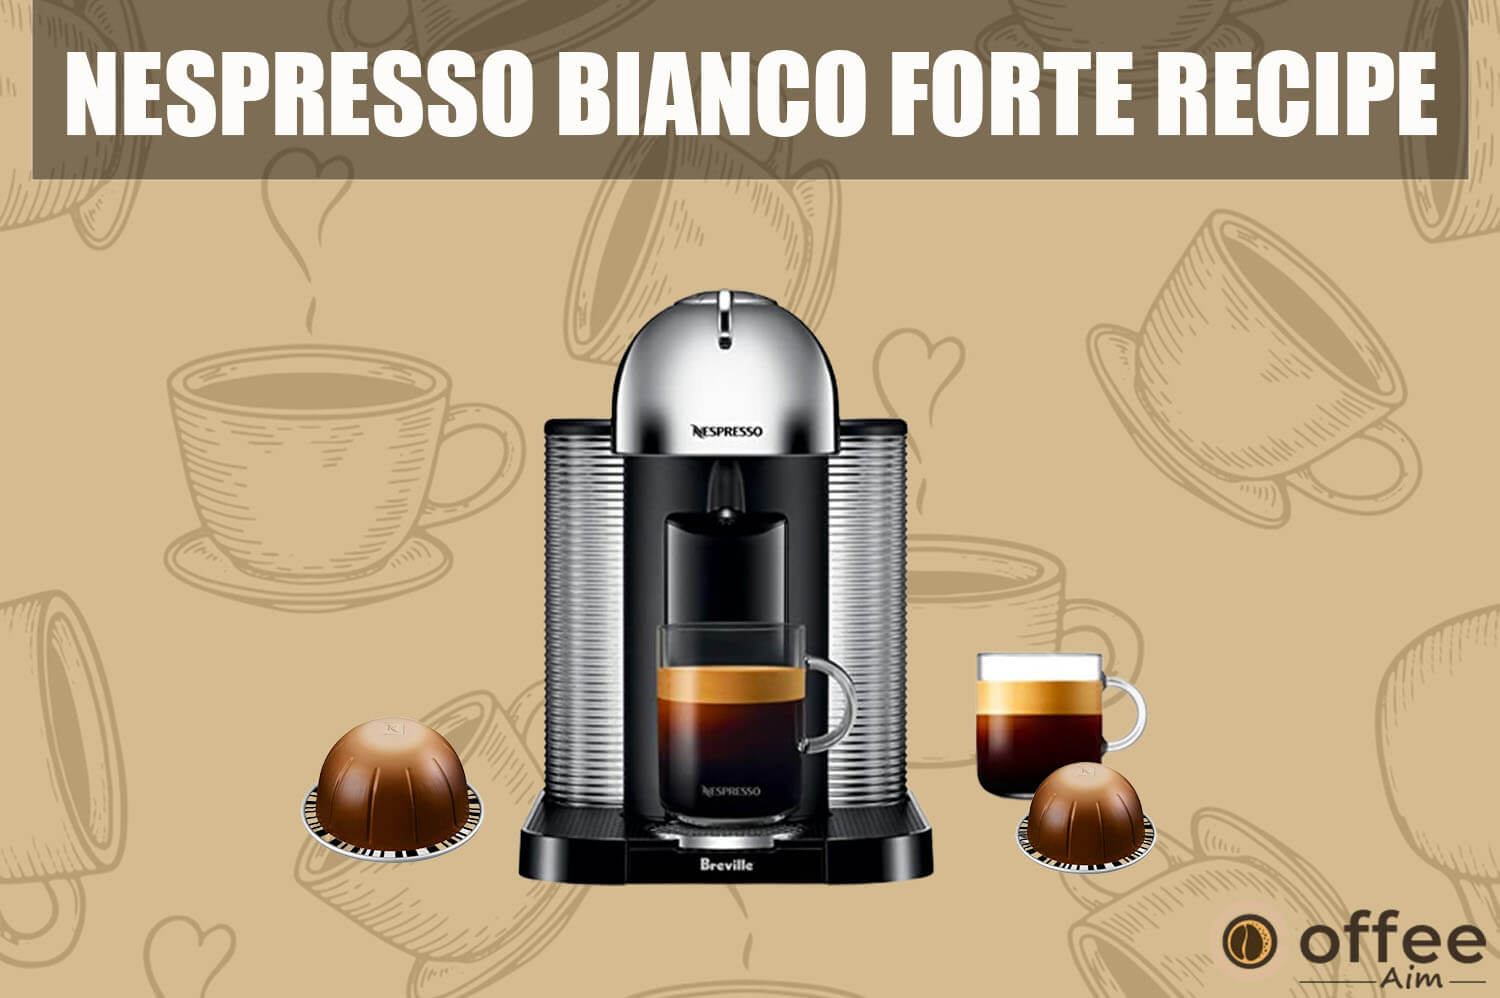 Featured image for the article "Nespresso Bianco Forte Recipe"